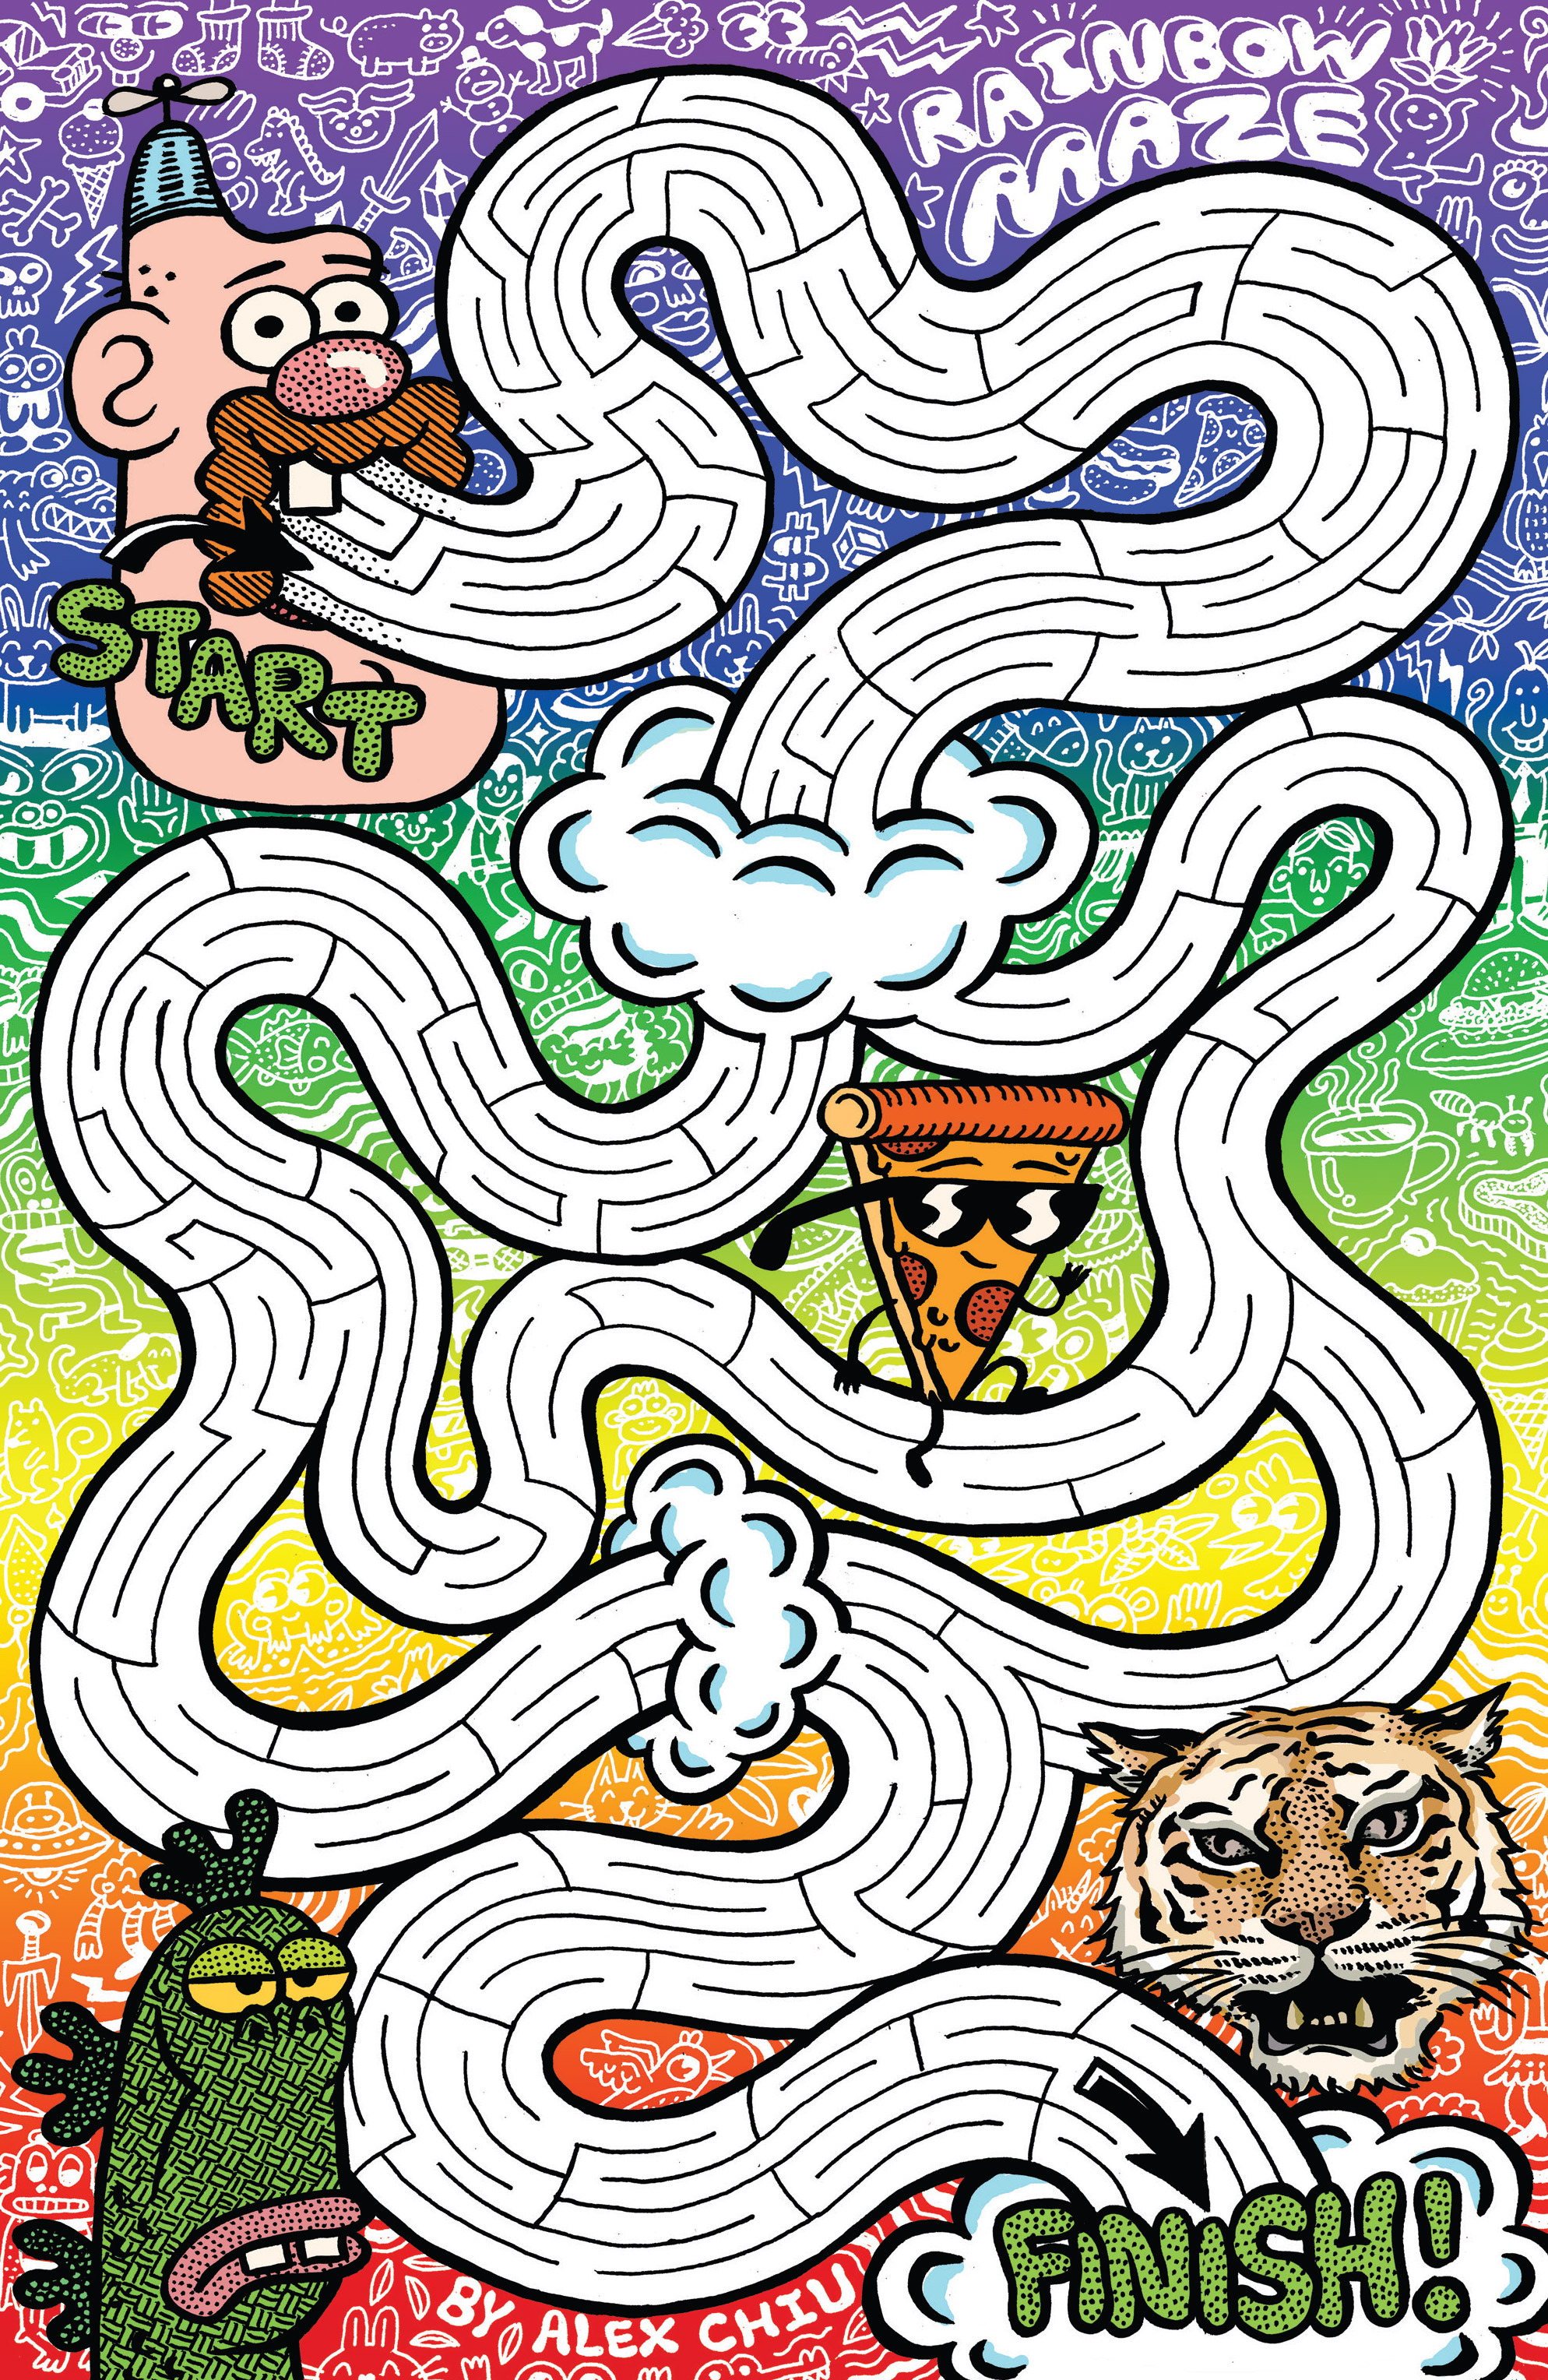 Read online Uncle Grandpa comic -  Issue #2 - 11